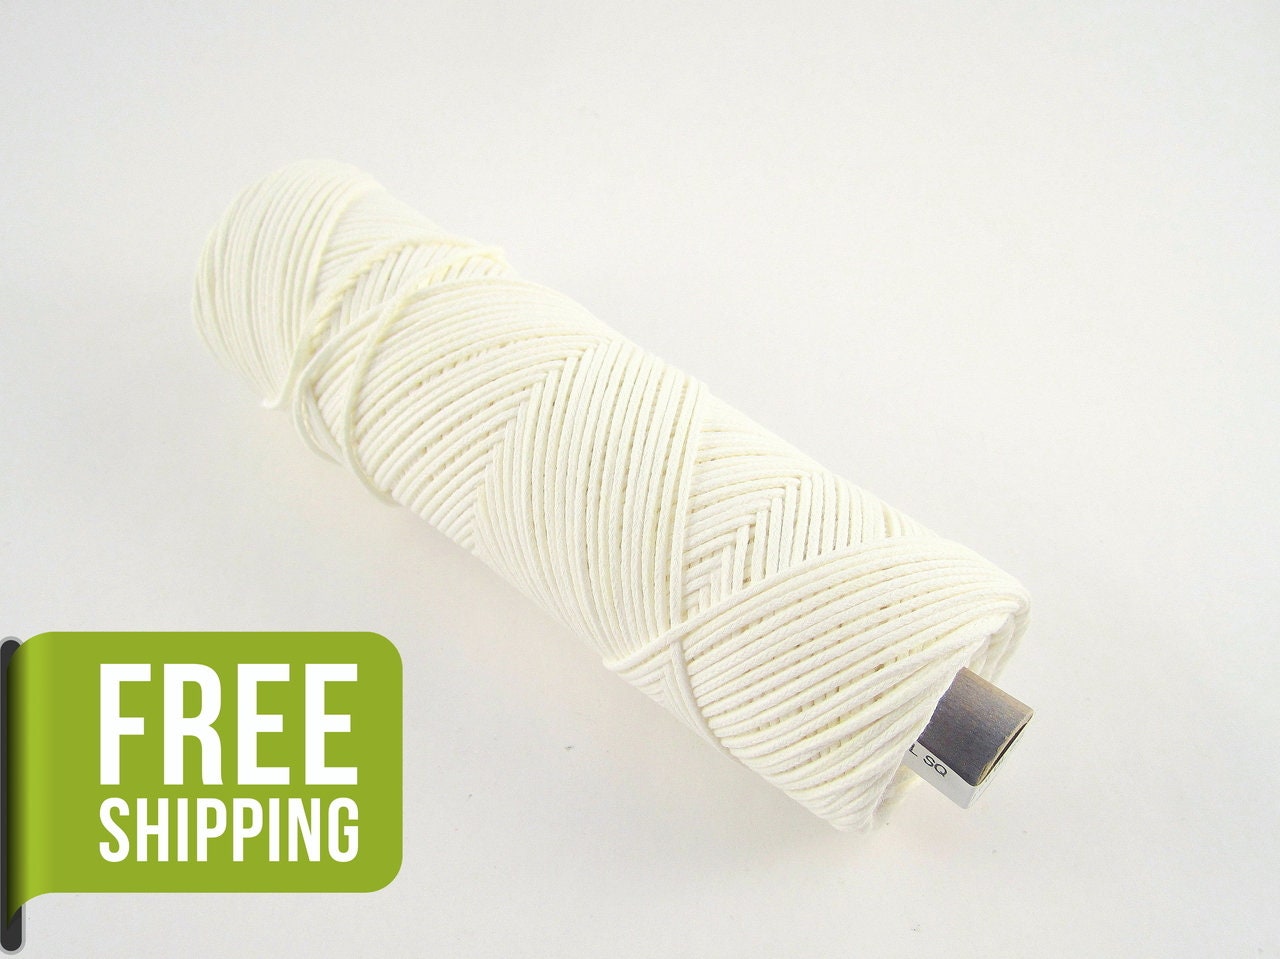 Cotton Wick for Candles Large Diameter, Circle Braided Beeswax Candle Wick,  DIY Mold Candle Wicks, Candle Making Supply 